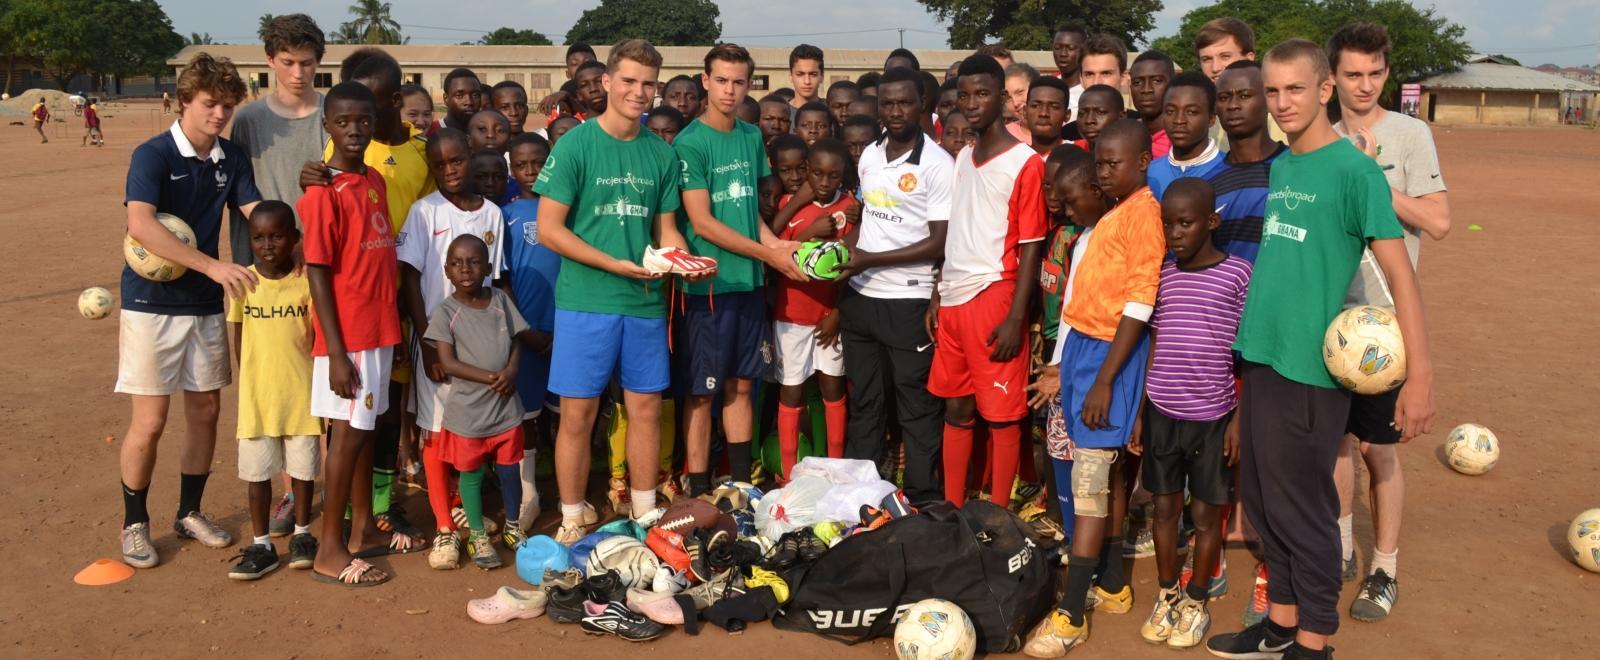 Projects Abroad volunteers taking part in football coaching for high school students in Ghana donate new equipment to a local team. 